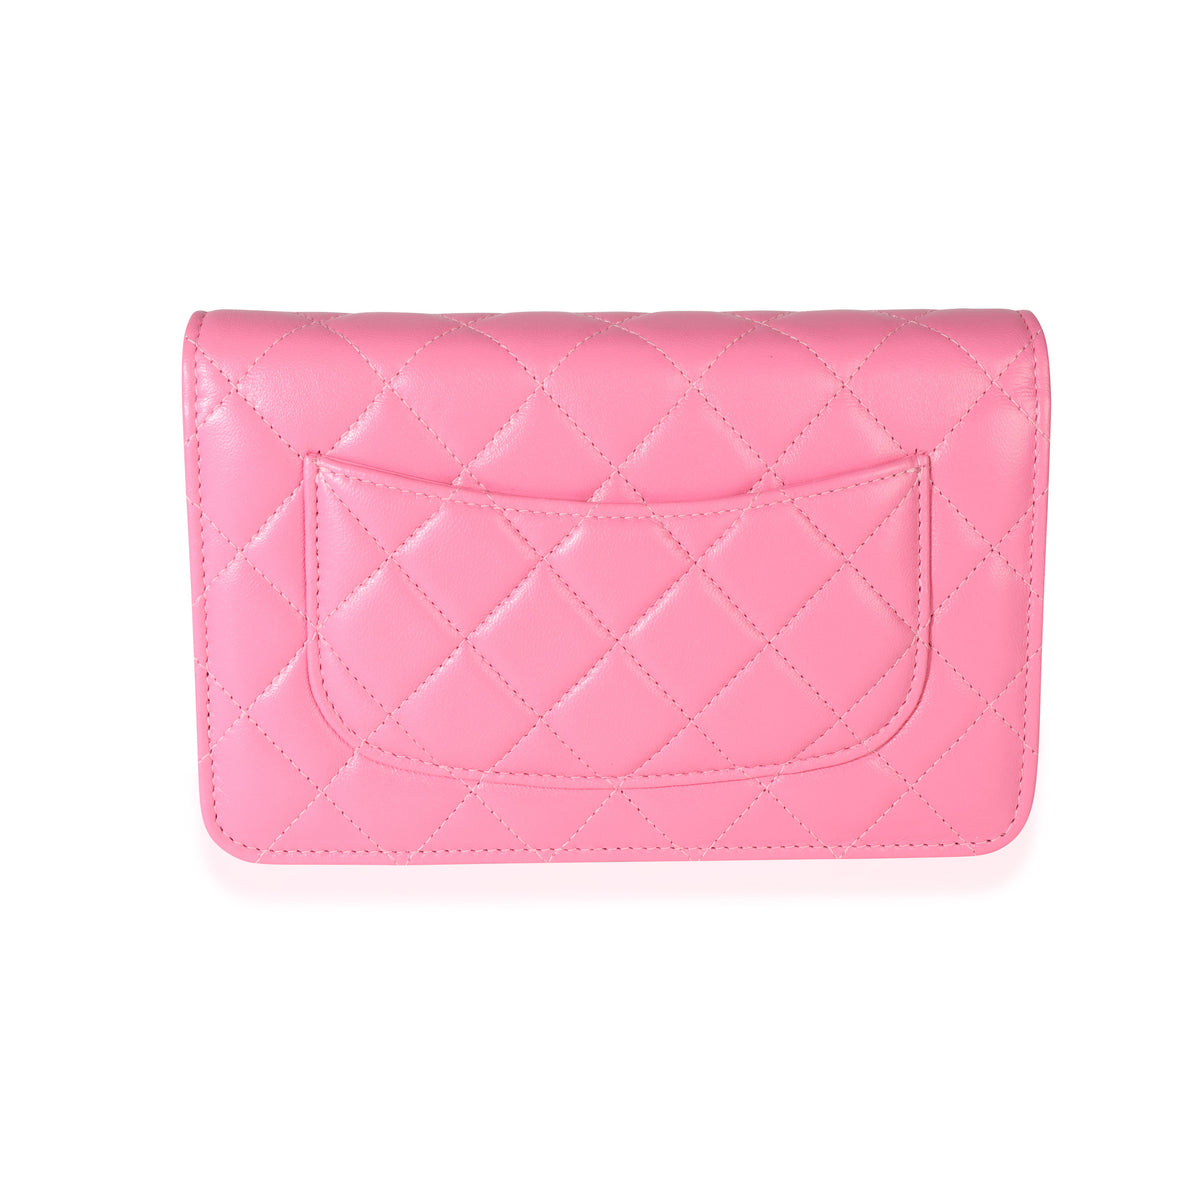 Chanel Pink Quilted Lambskin Pearl Crush Wallet on Chain, myGemma